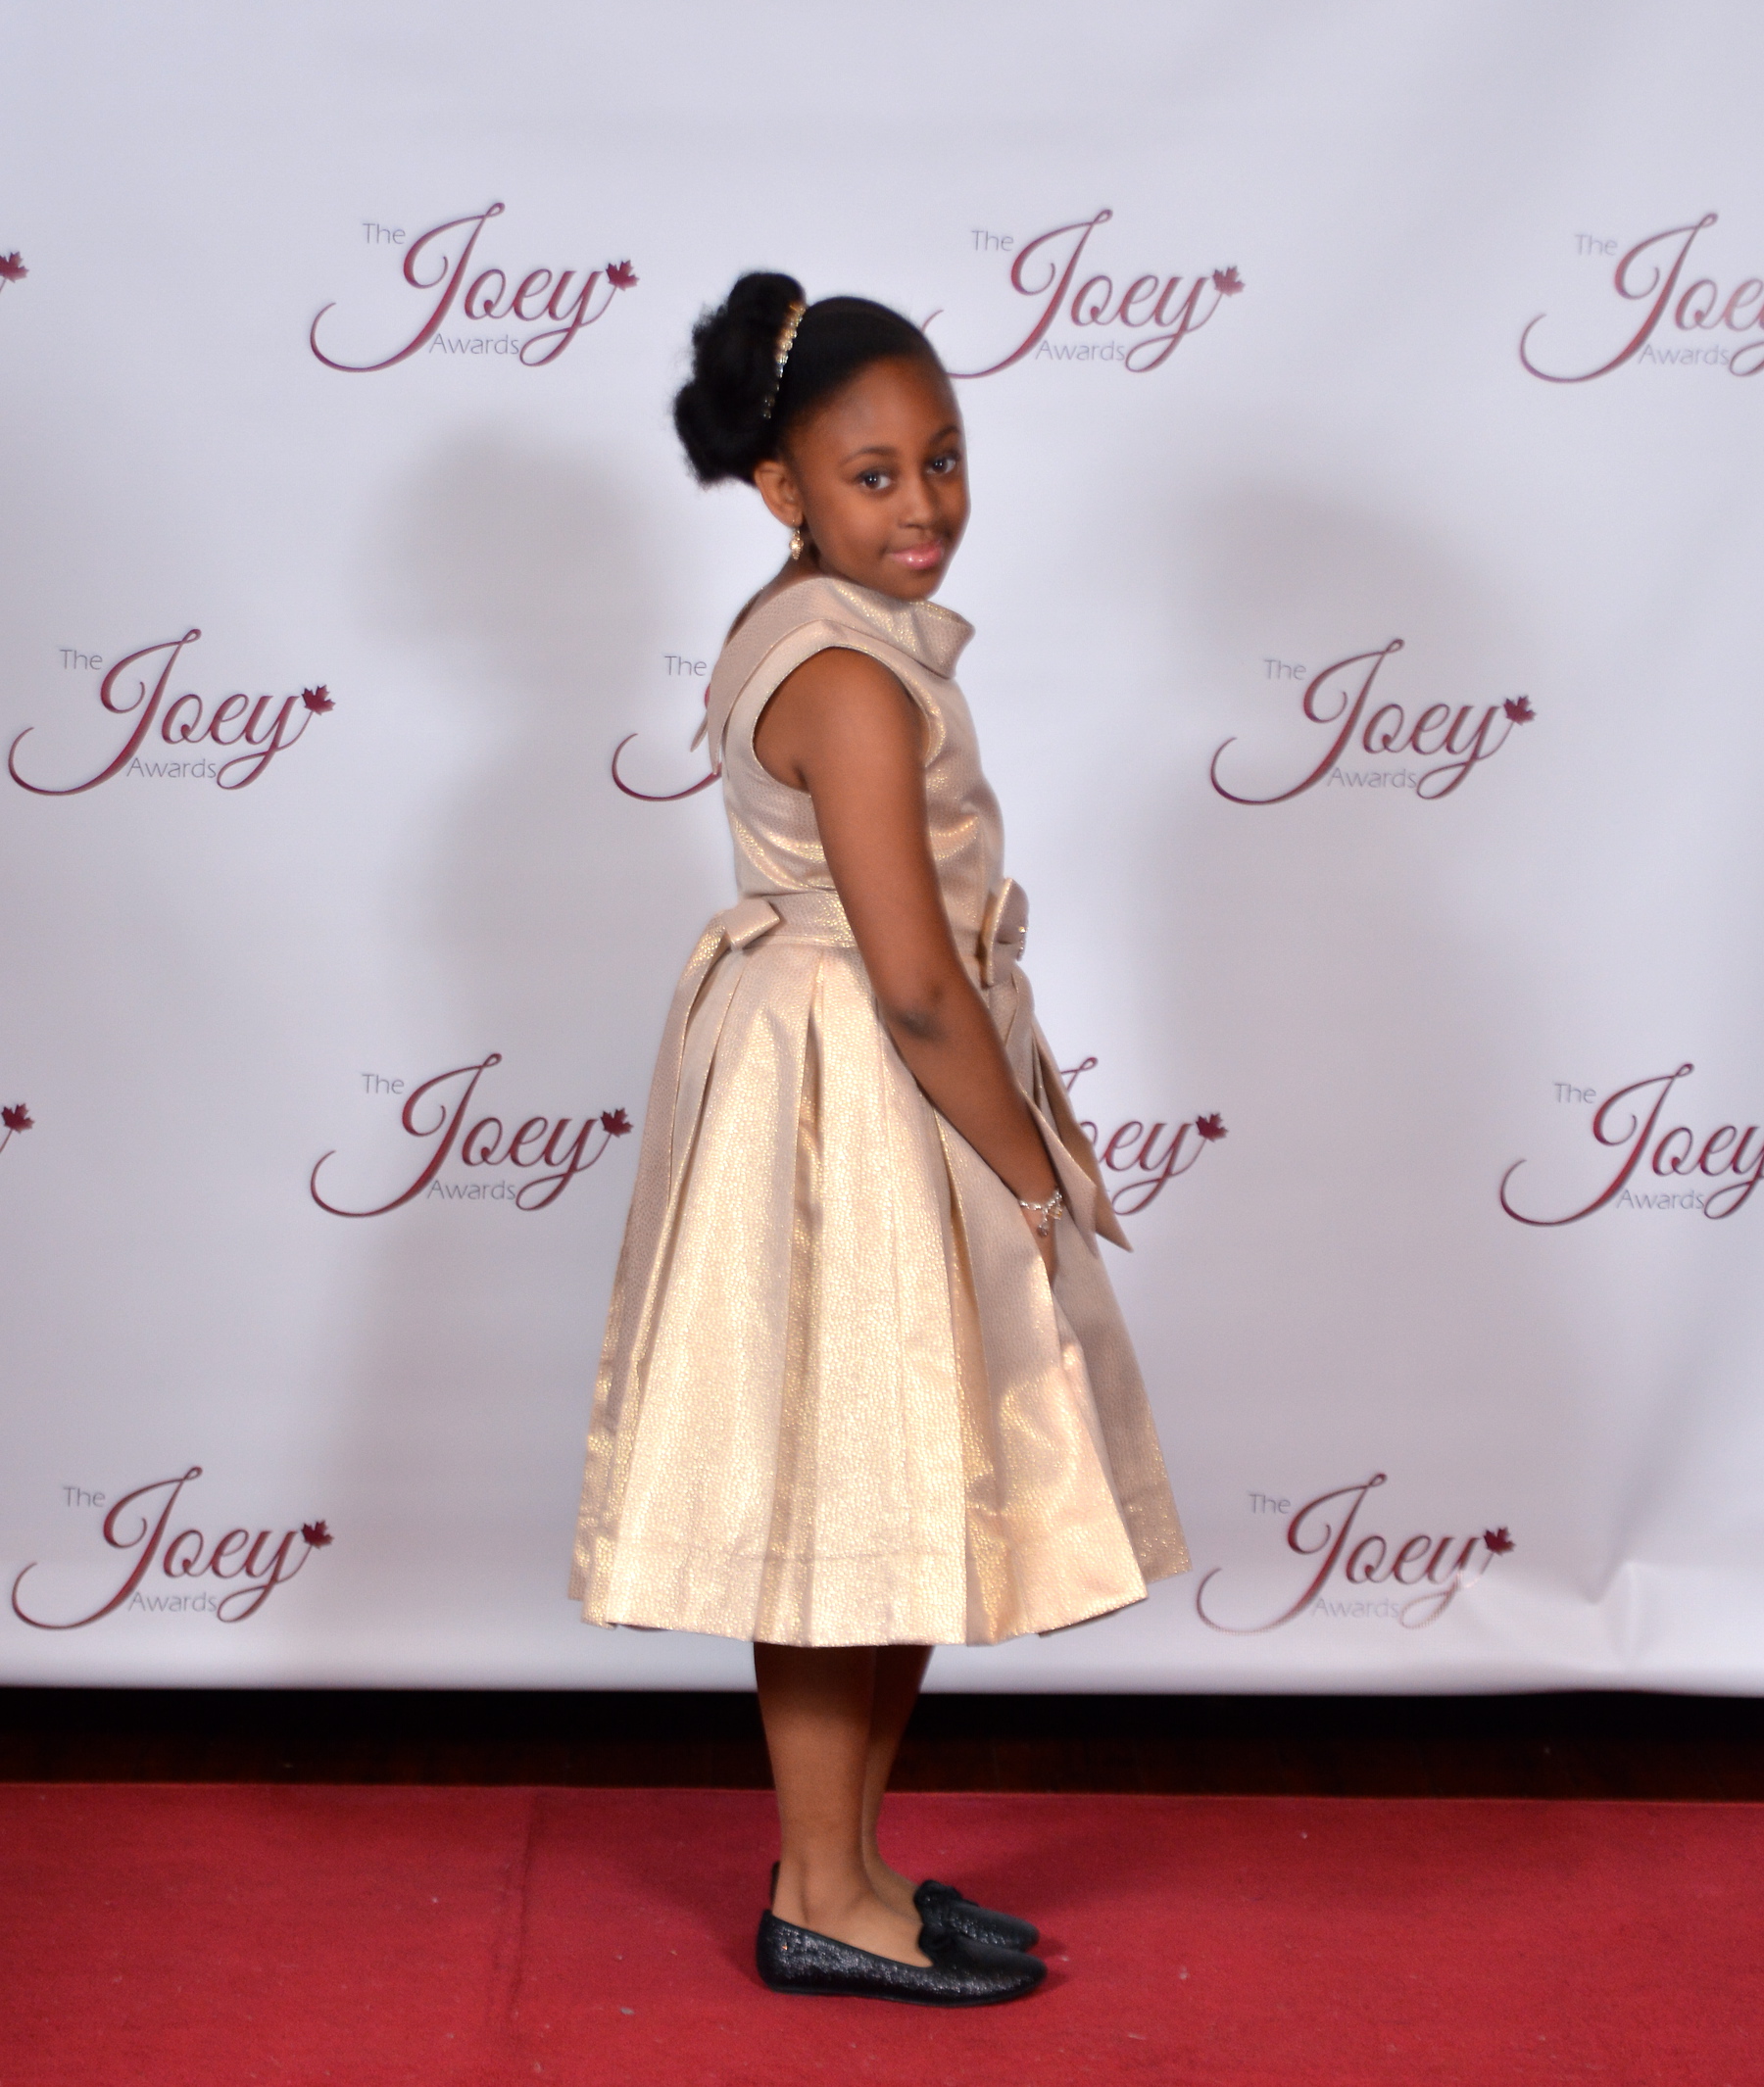 Allison at the 2014 Joey Awards in Vancouver where she was nominated for her performance in Clean Teeth Wednesdays